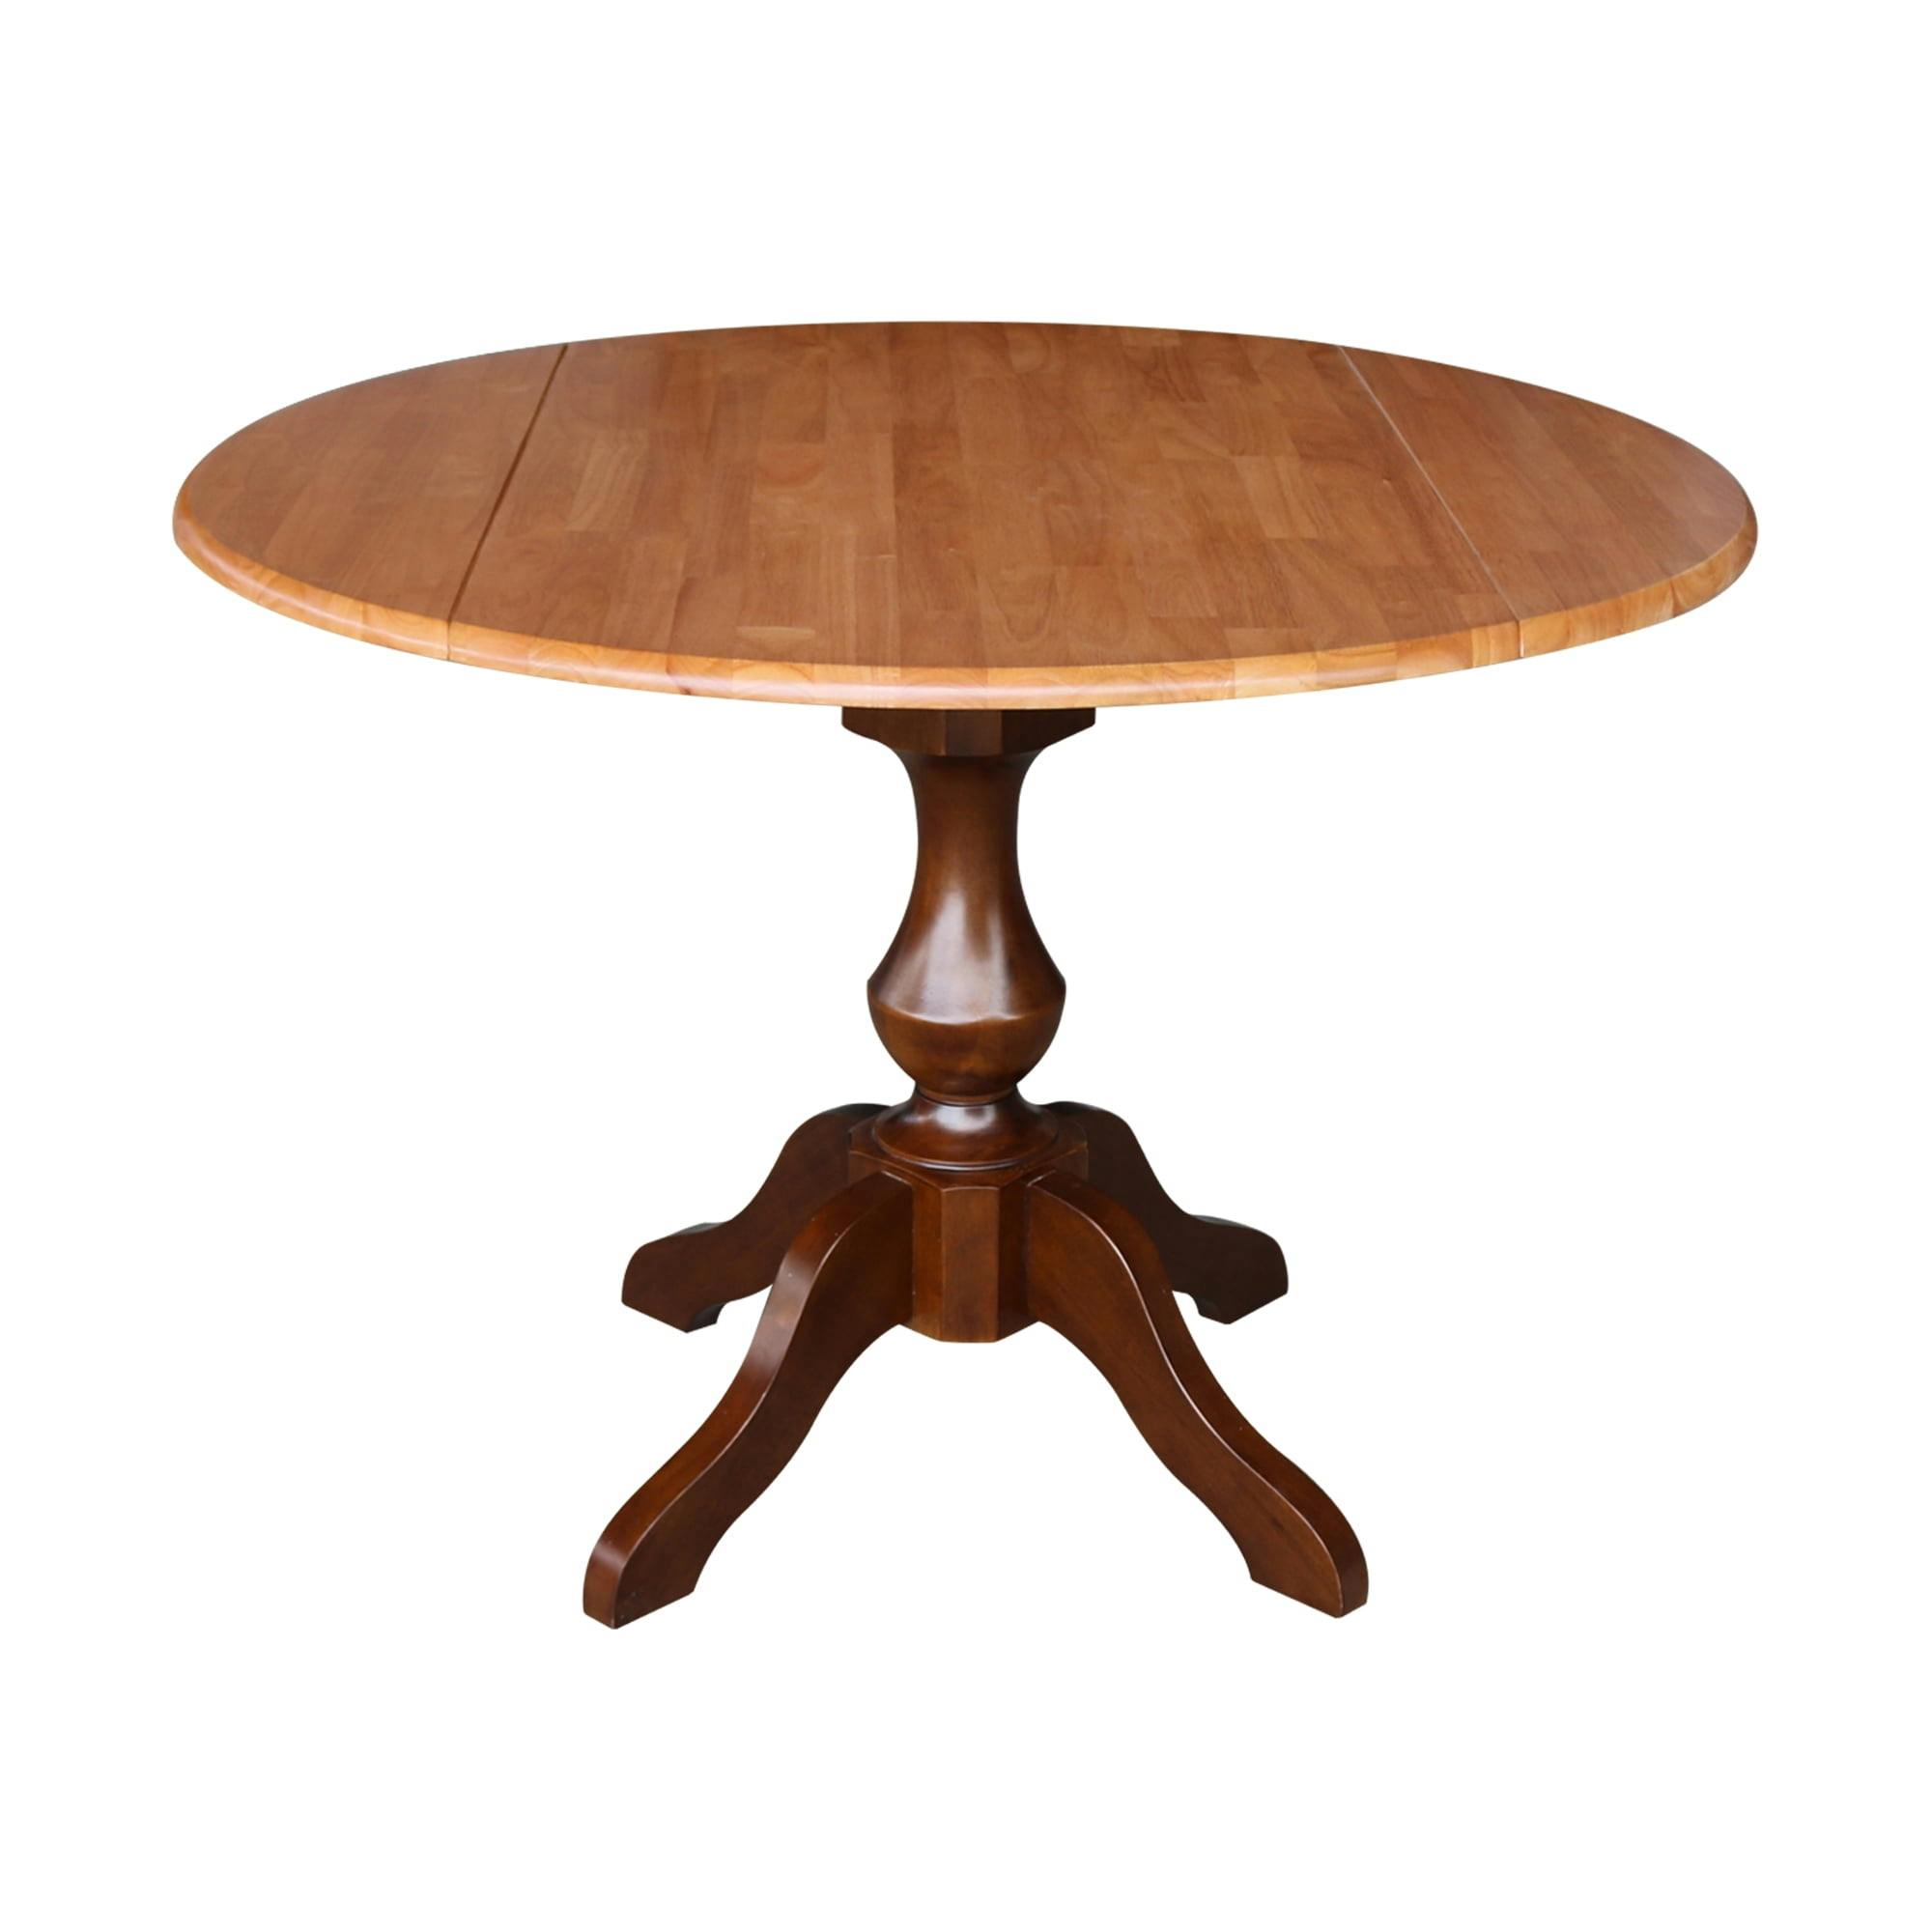 Cinnamon Espresso 45" Round Farmhouse Extendable Dining Table with Pedestal Base